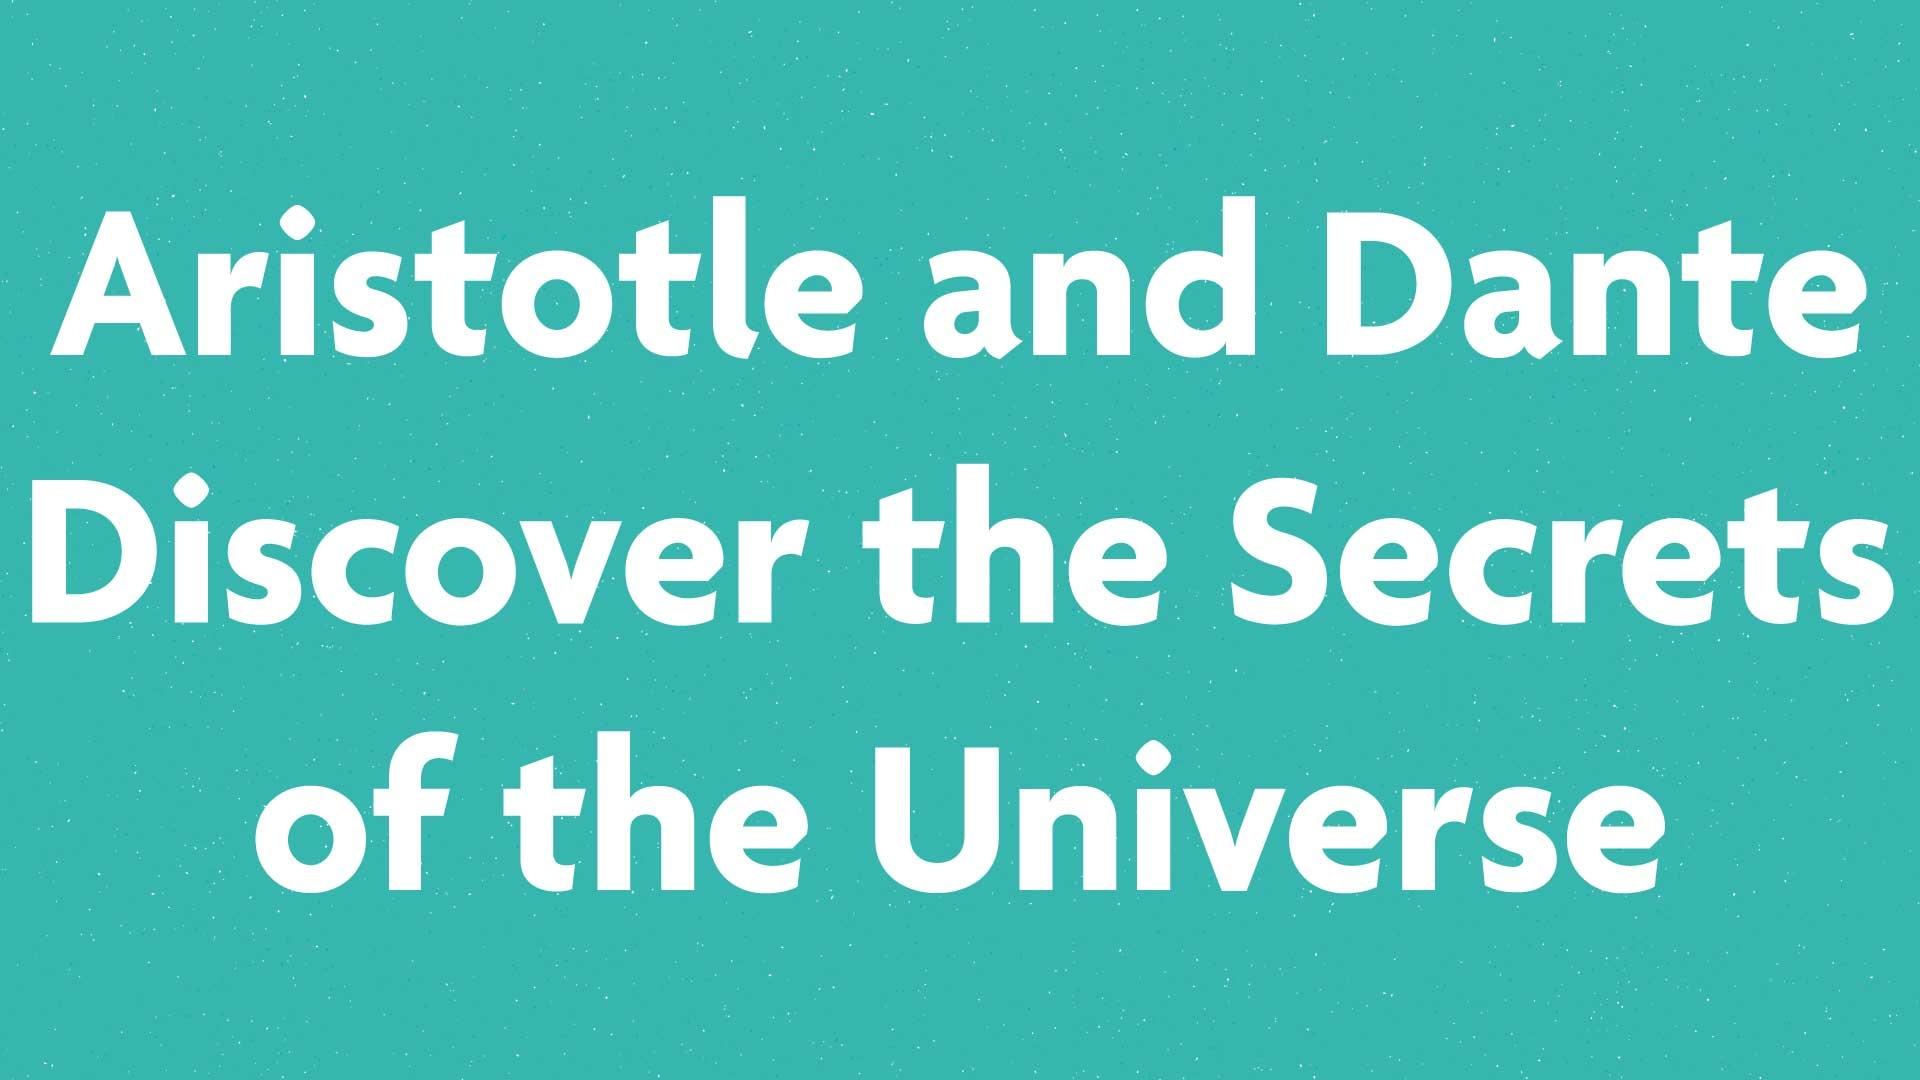 Aristotle and Dante Discover the Secrets of the Universe book submission card on a green background.